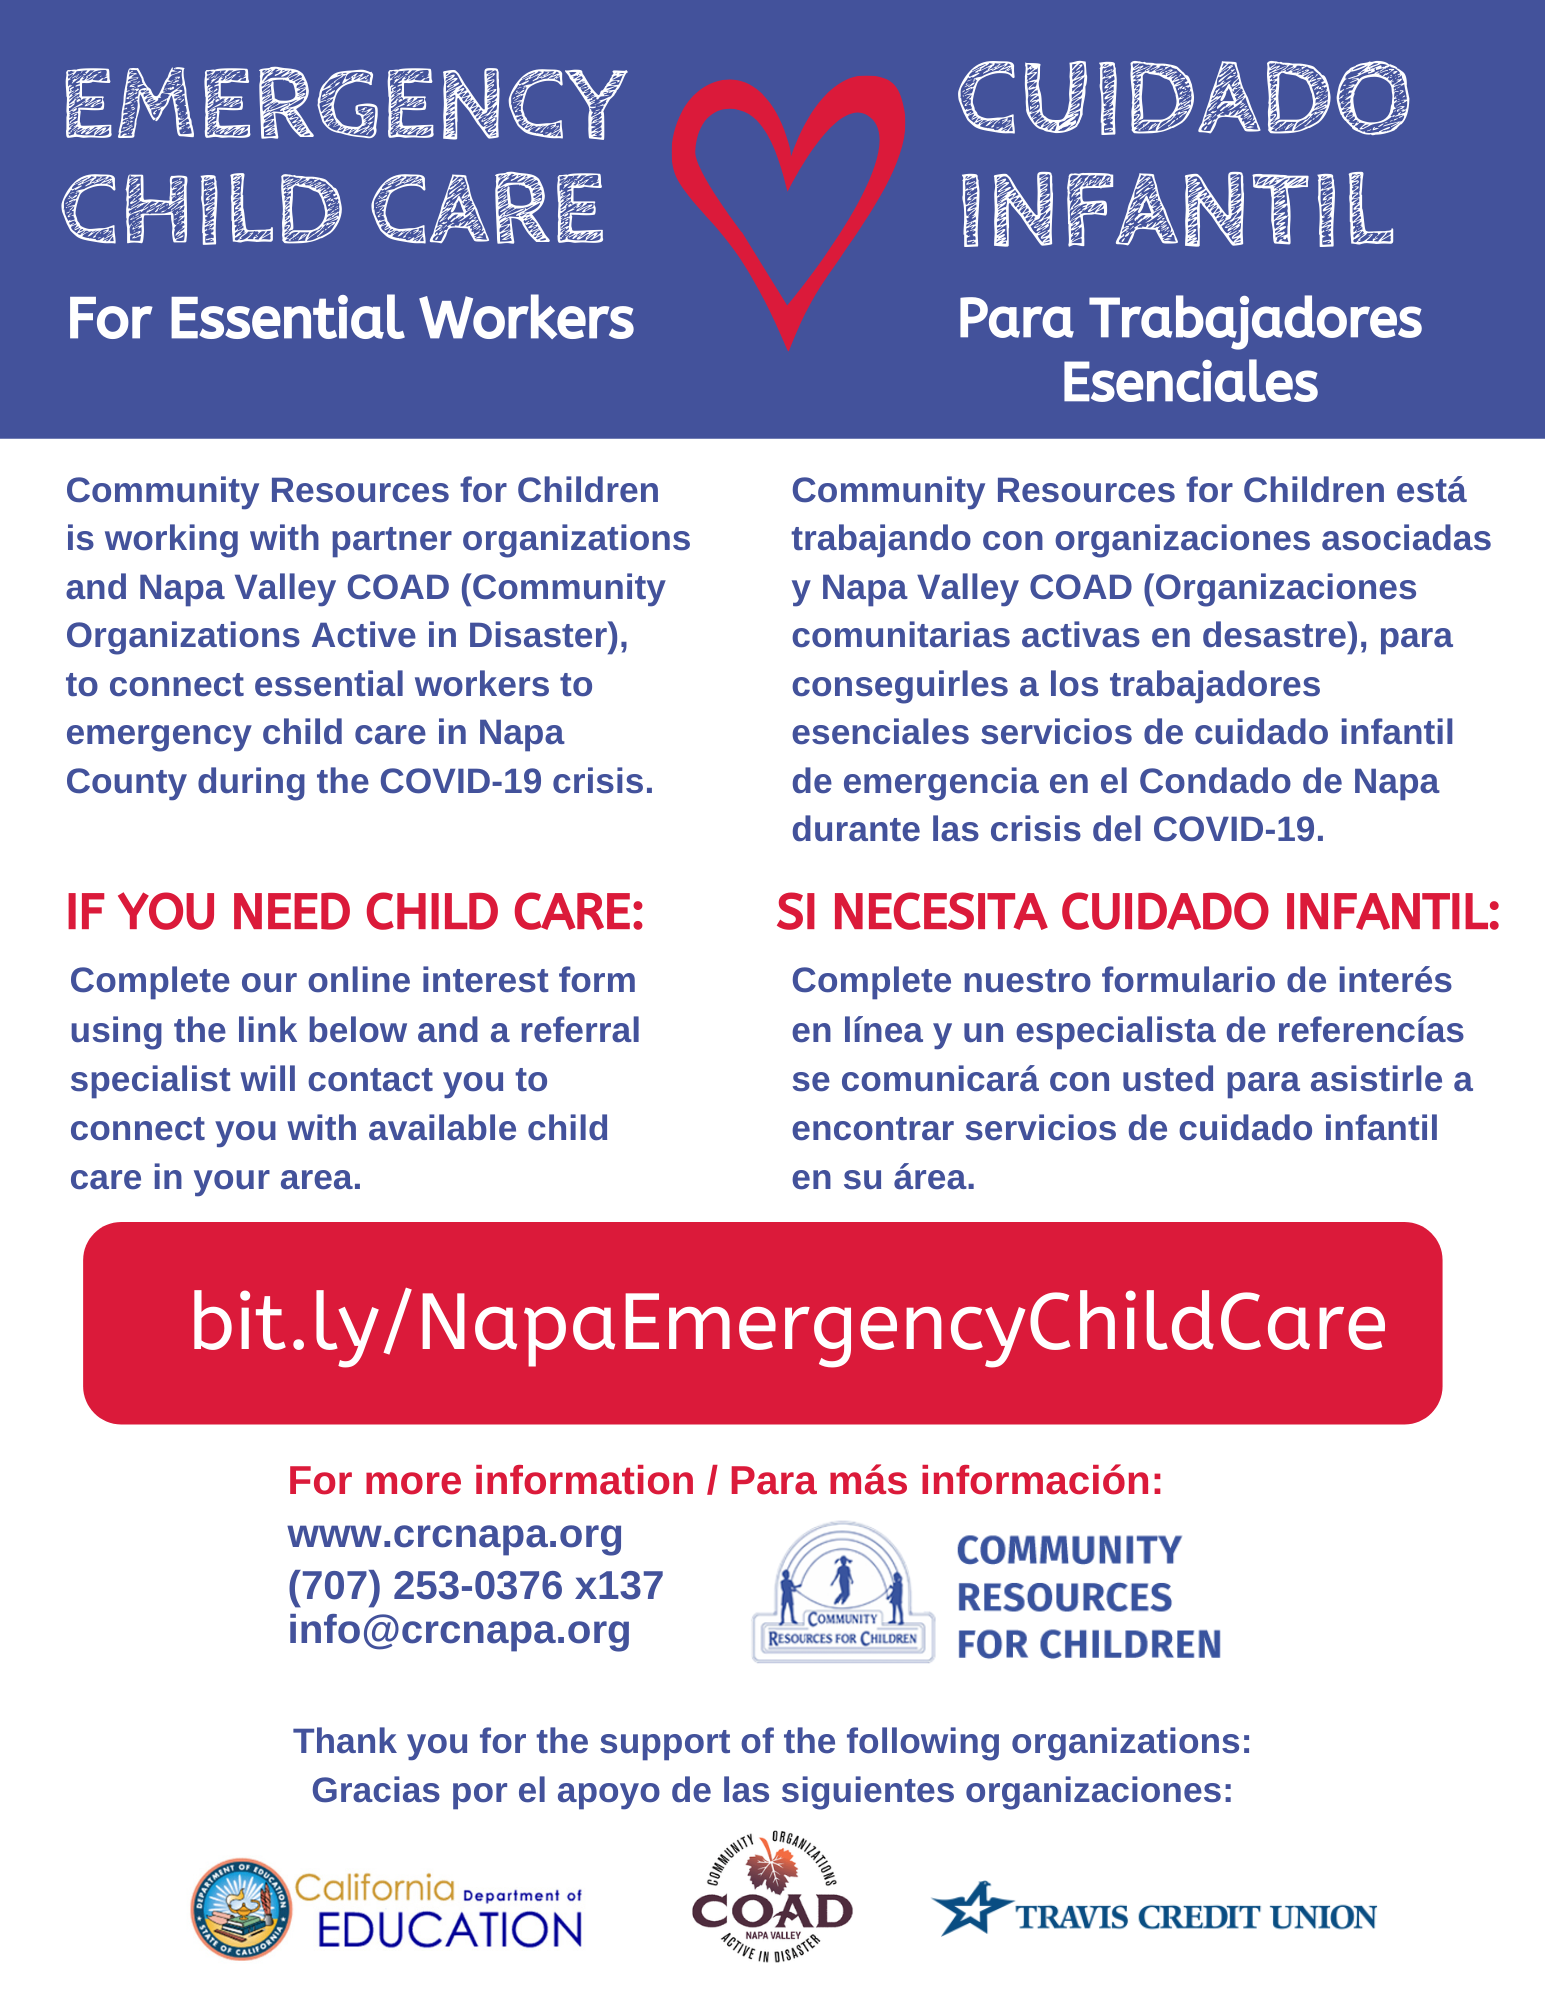 Napa County Emergency Child Care for Essential Workers